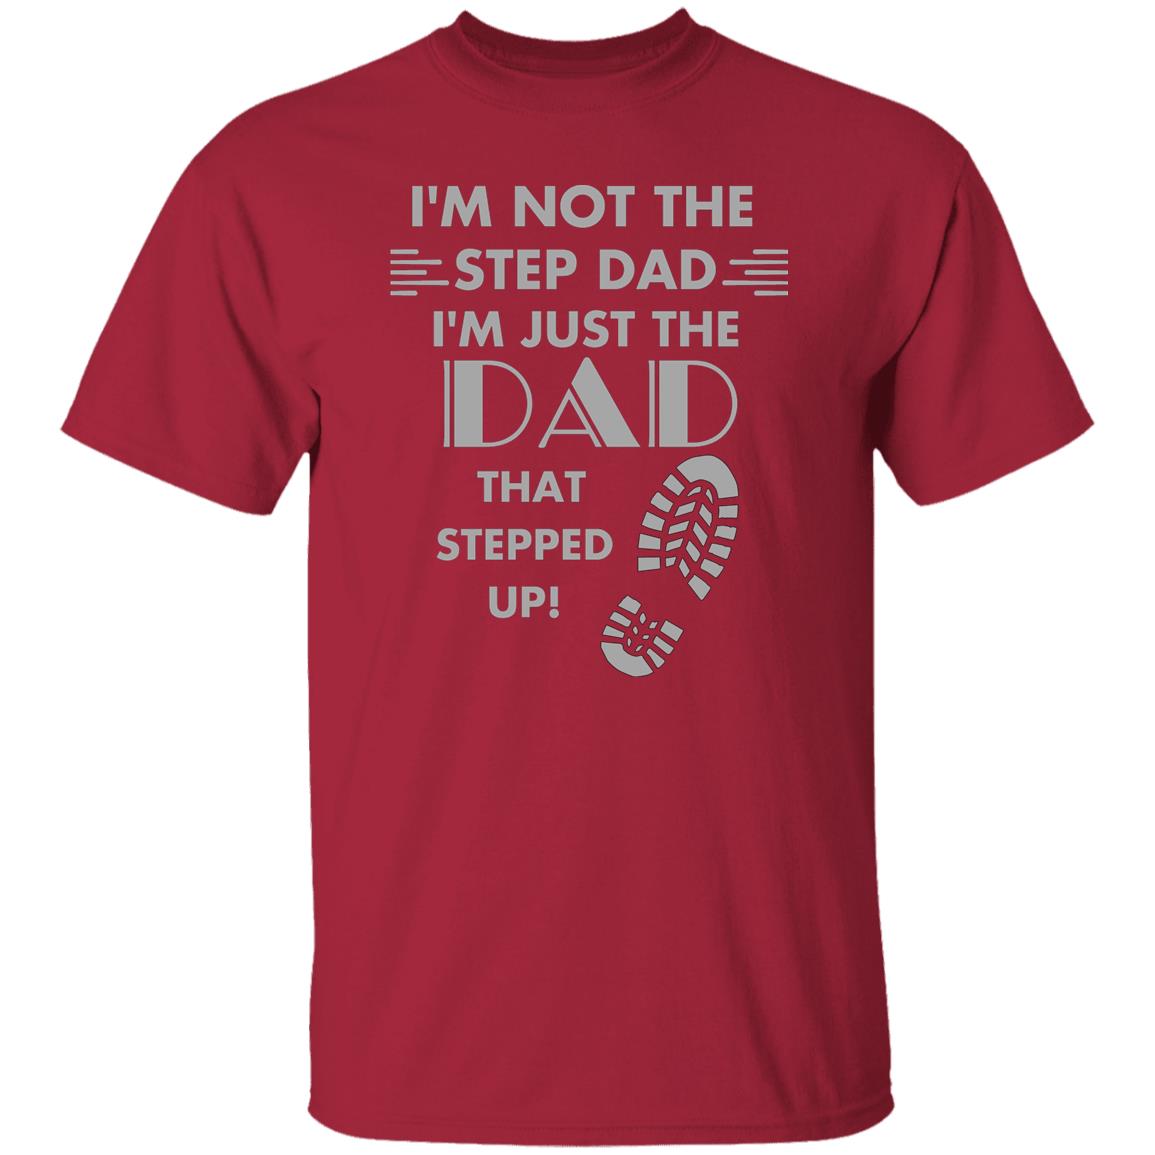 Stepped up Dad (Step Dad / Step Father) - G500 5.3 oz. T-Shirt